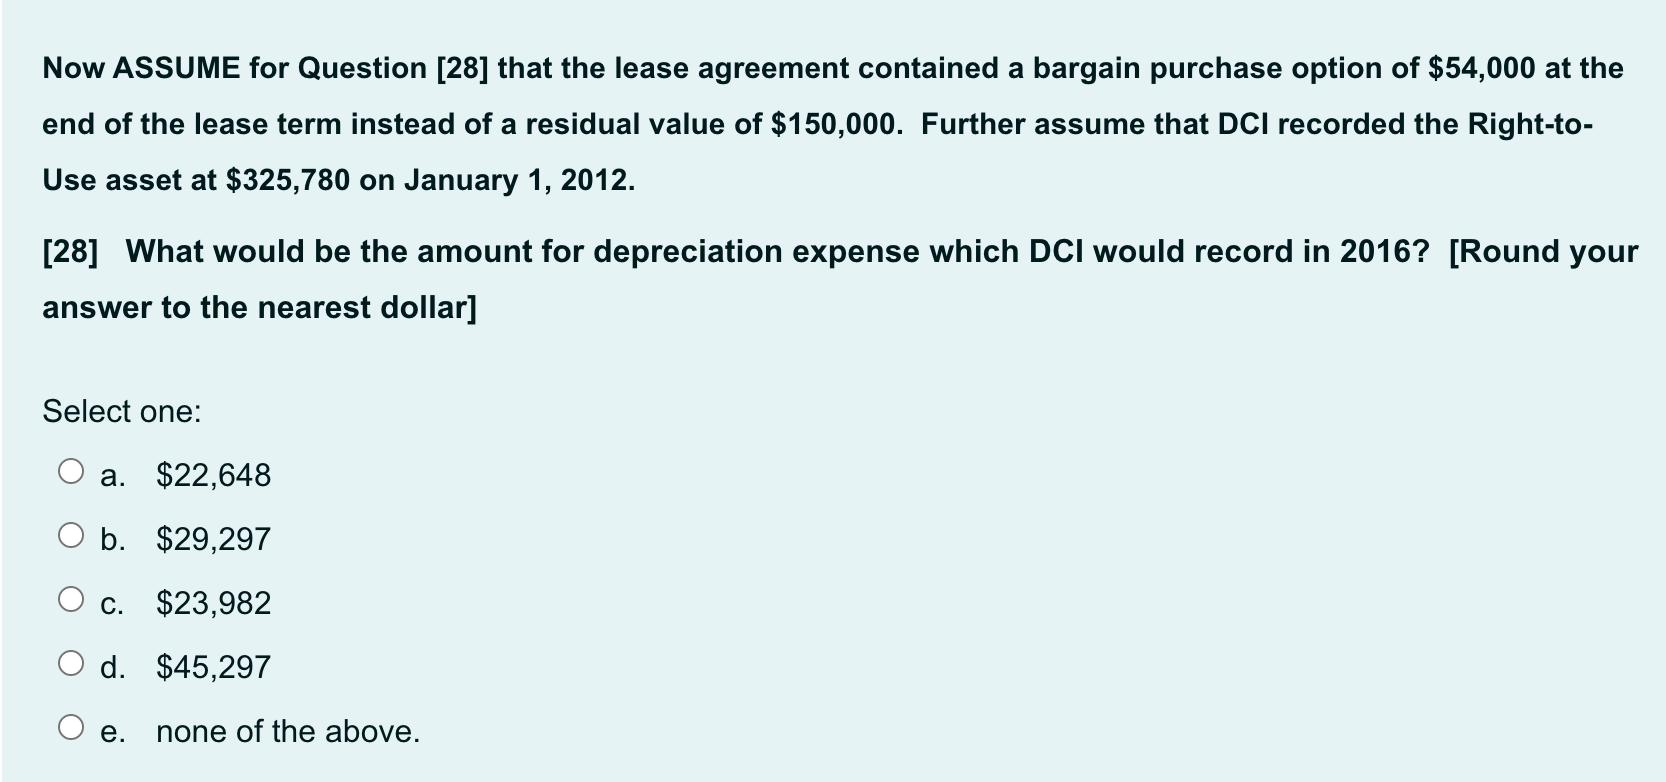 Now ASSUME for Question [28] that the lease agreement contained a bargain purchase option of $54,000 at the end of the lease